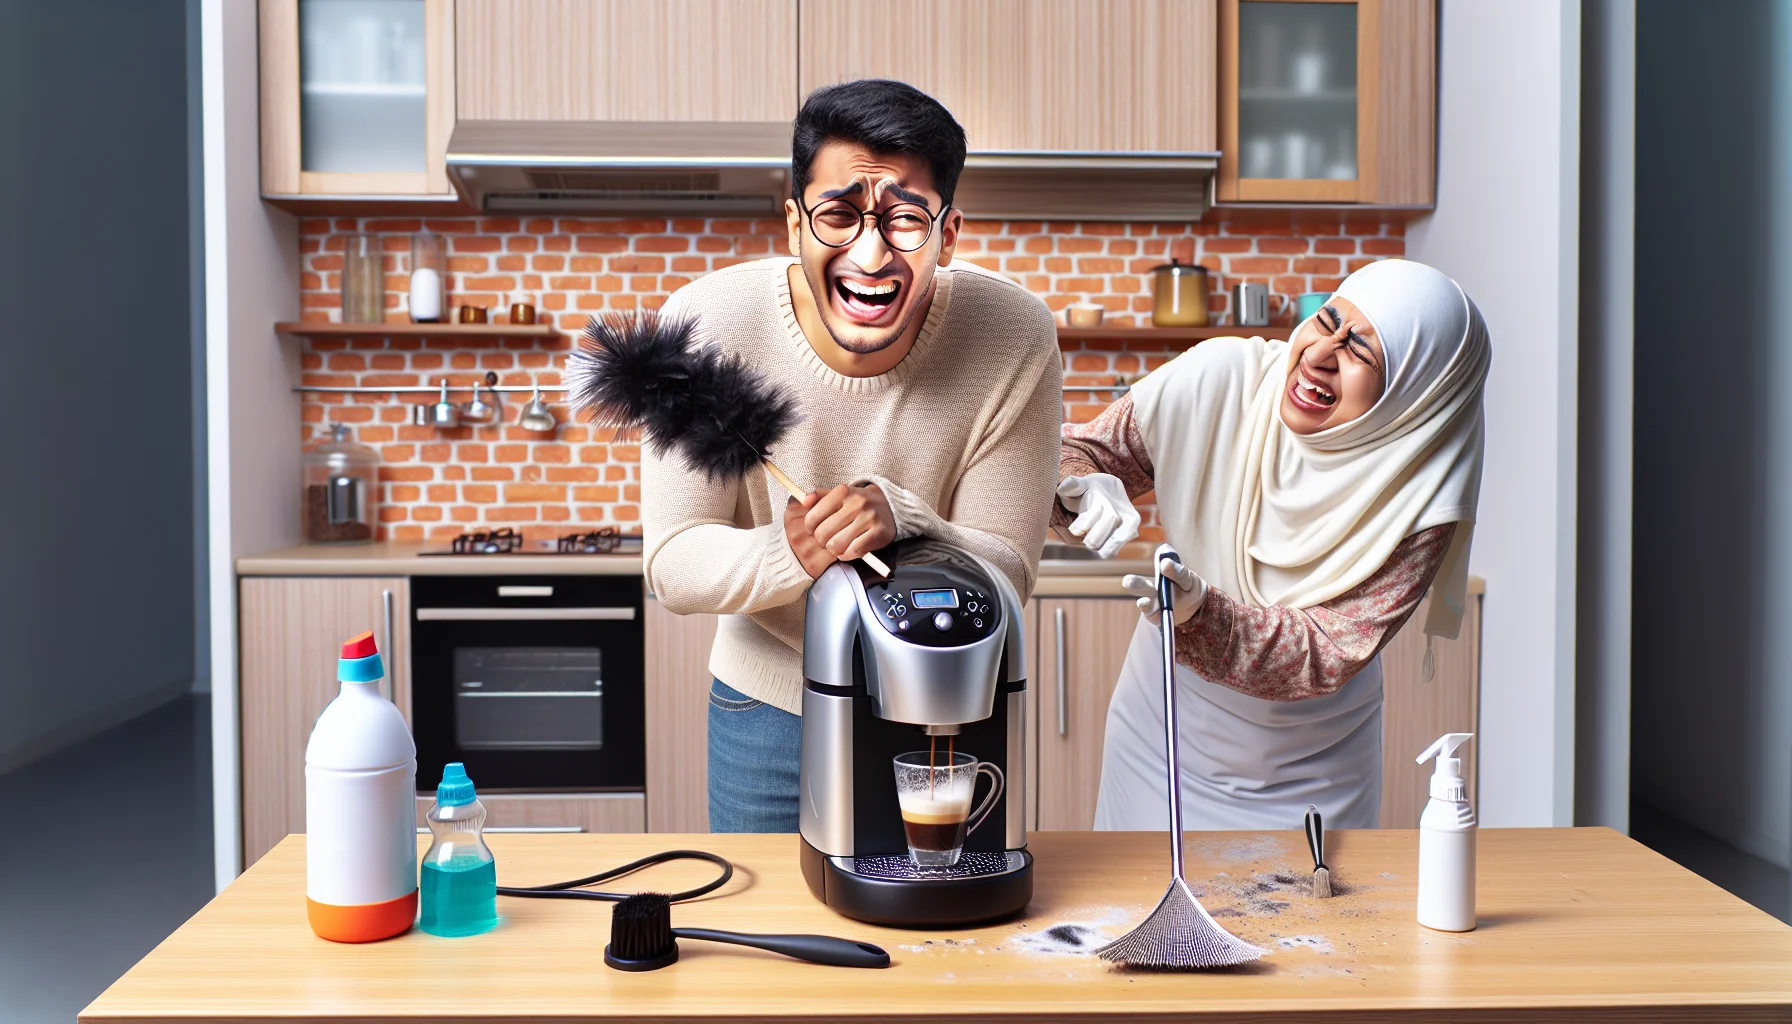 Create a humorous, realistic scene involving the cleaning of a compact espresso machine, not specific to any brand. Picture a baffled yet charmed South Asian man trying to clean the machine using a feather duster under the mistaken belief it's part of the cleaning process. Meanwhile, a laughing Middle Eastern woman stands nearby, holding the correct cleaning tools (a cleaning brush and a decalcifying solution) ready to step in and show him the correct way. Light heartedness fills the room, making the ordinary task entertaining and inviting.